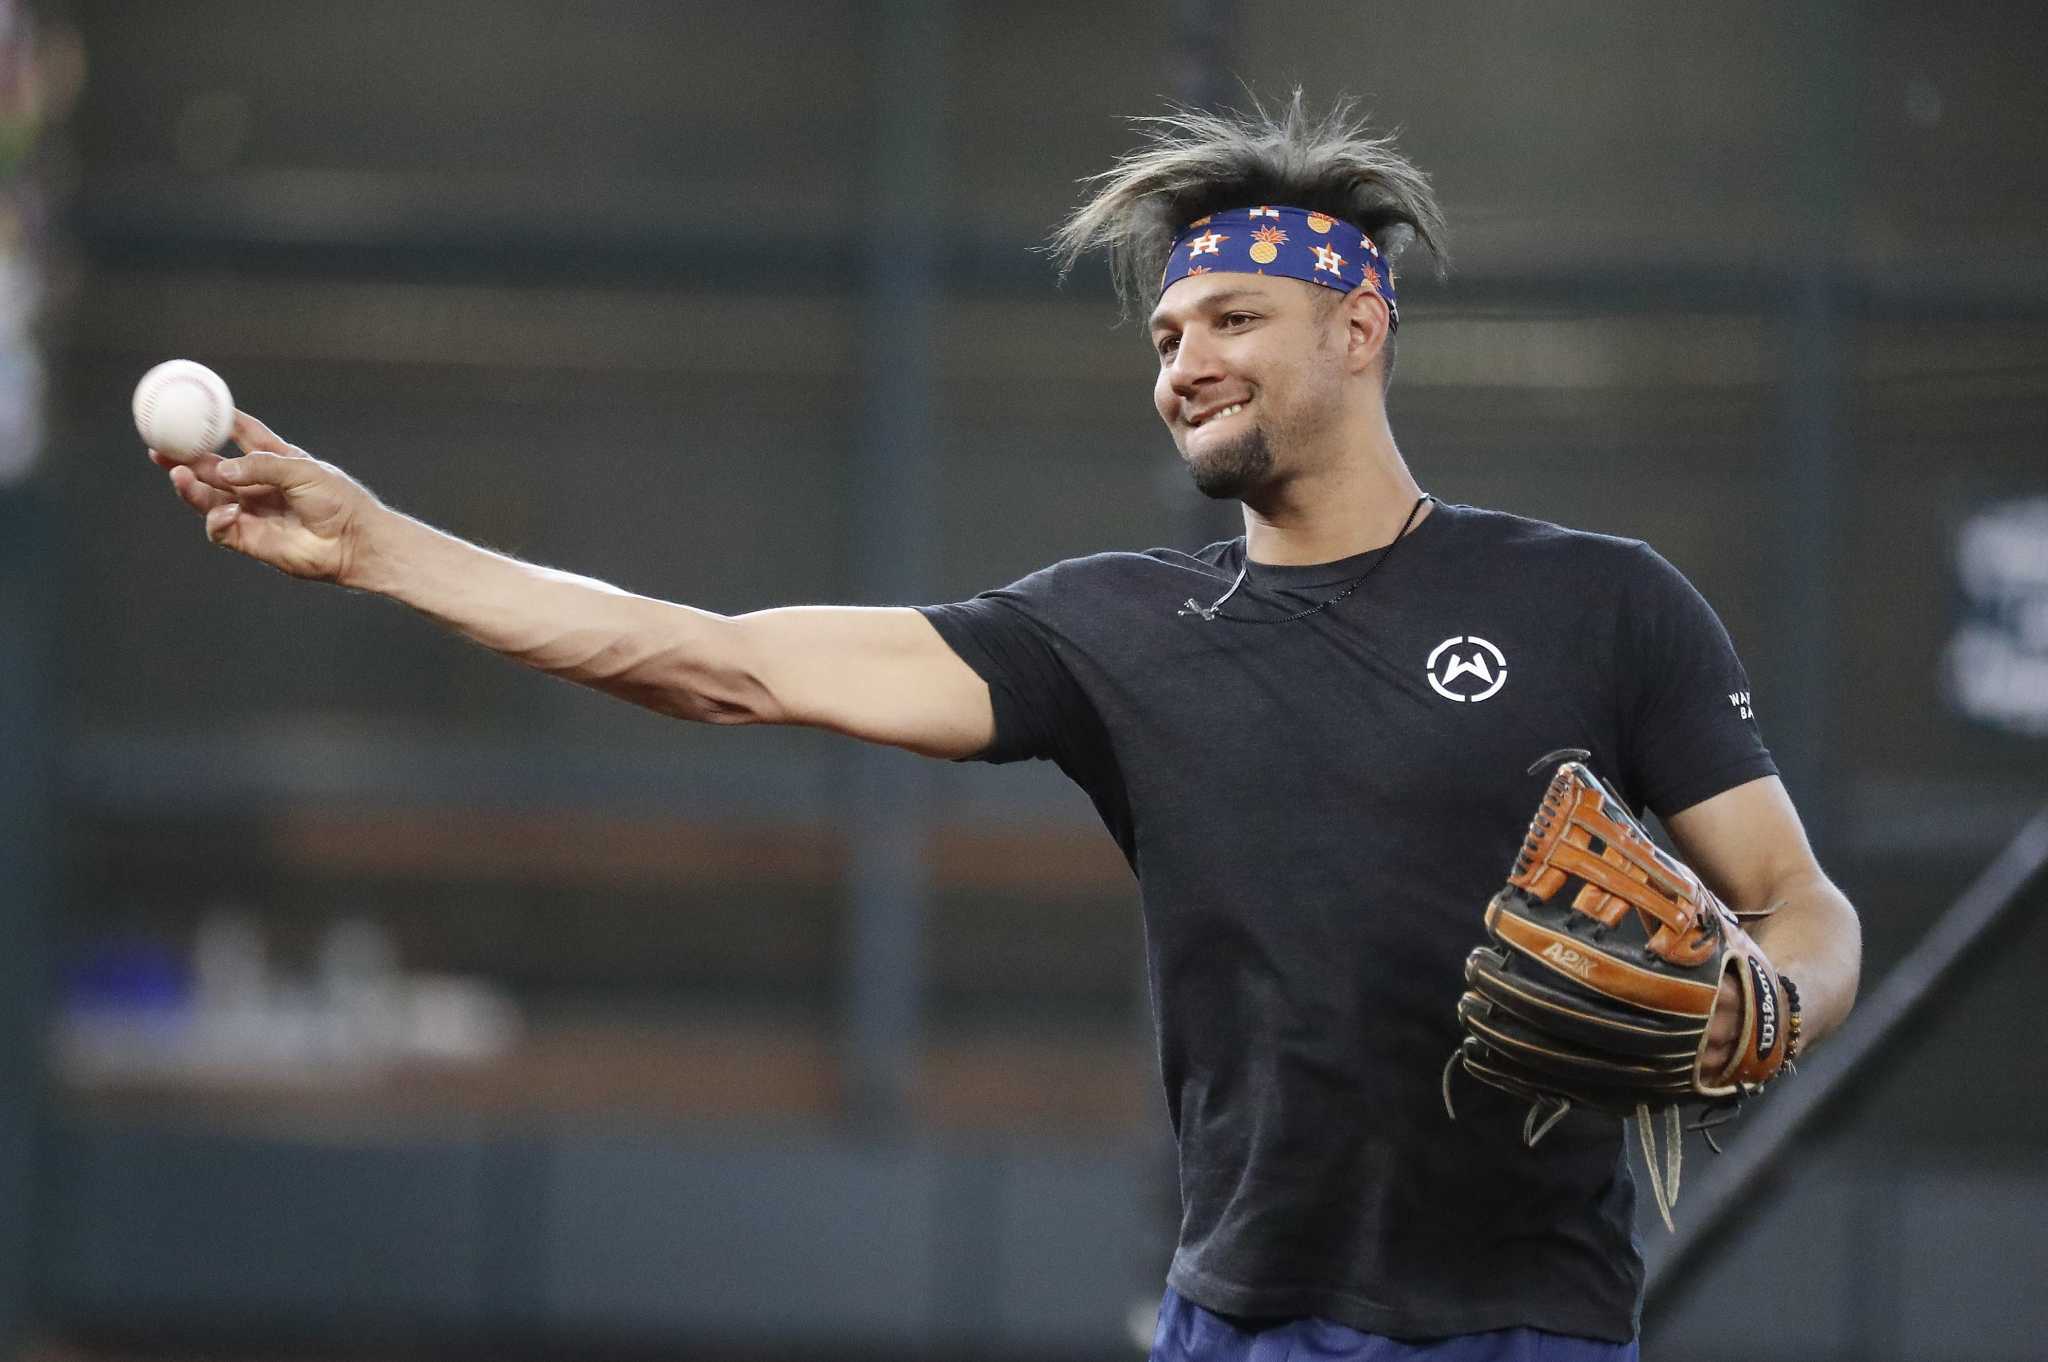 After worst year of his career, batting champ Yuli Gurriel primed for